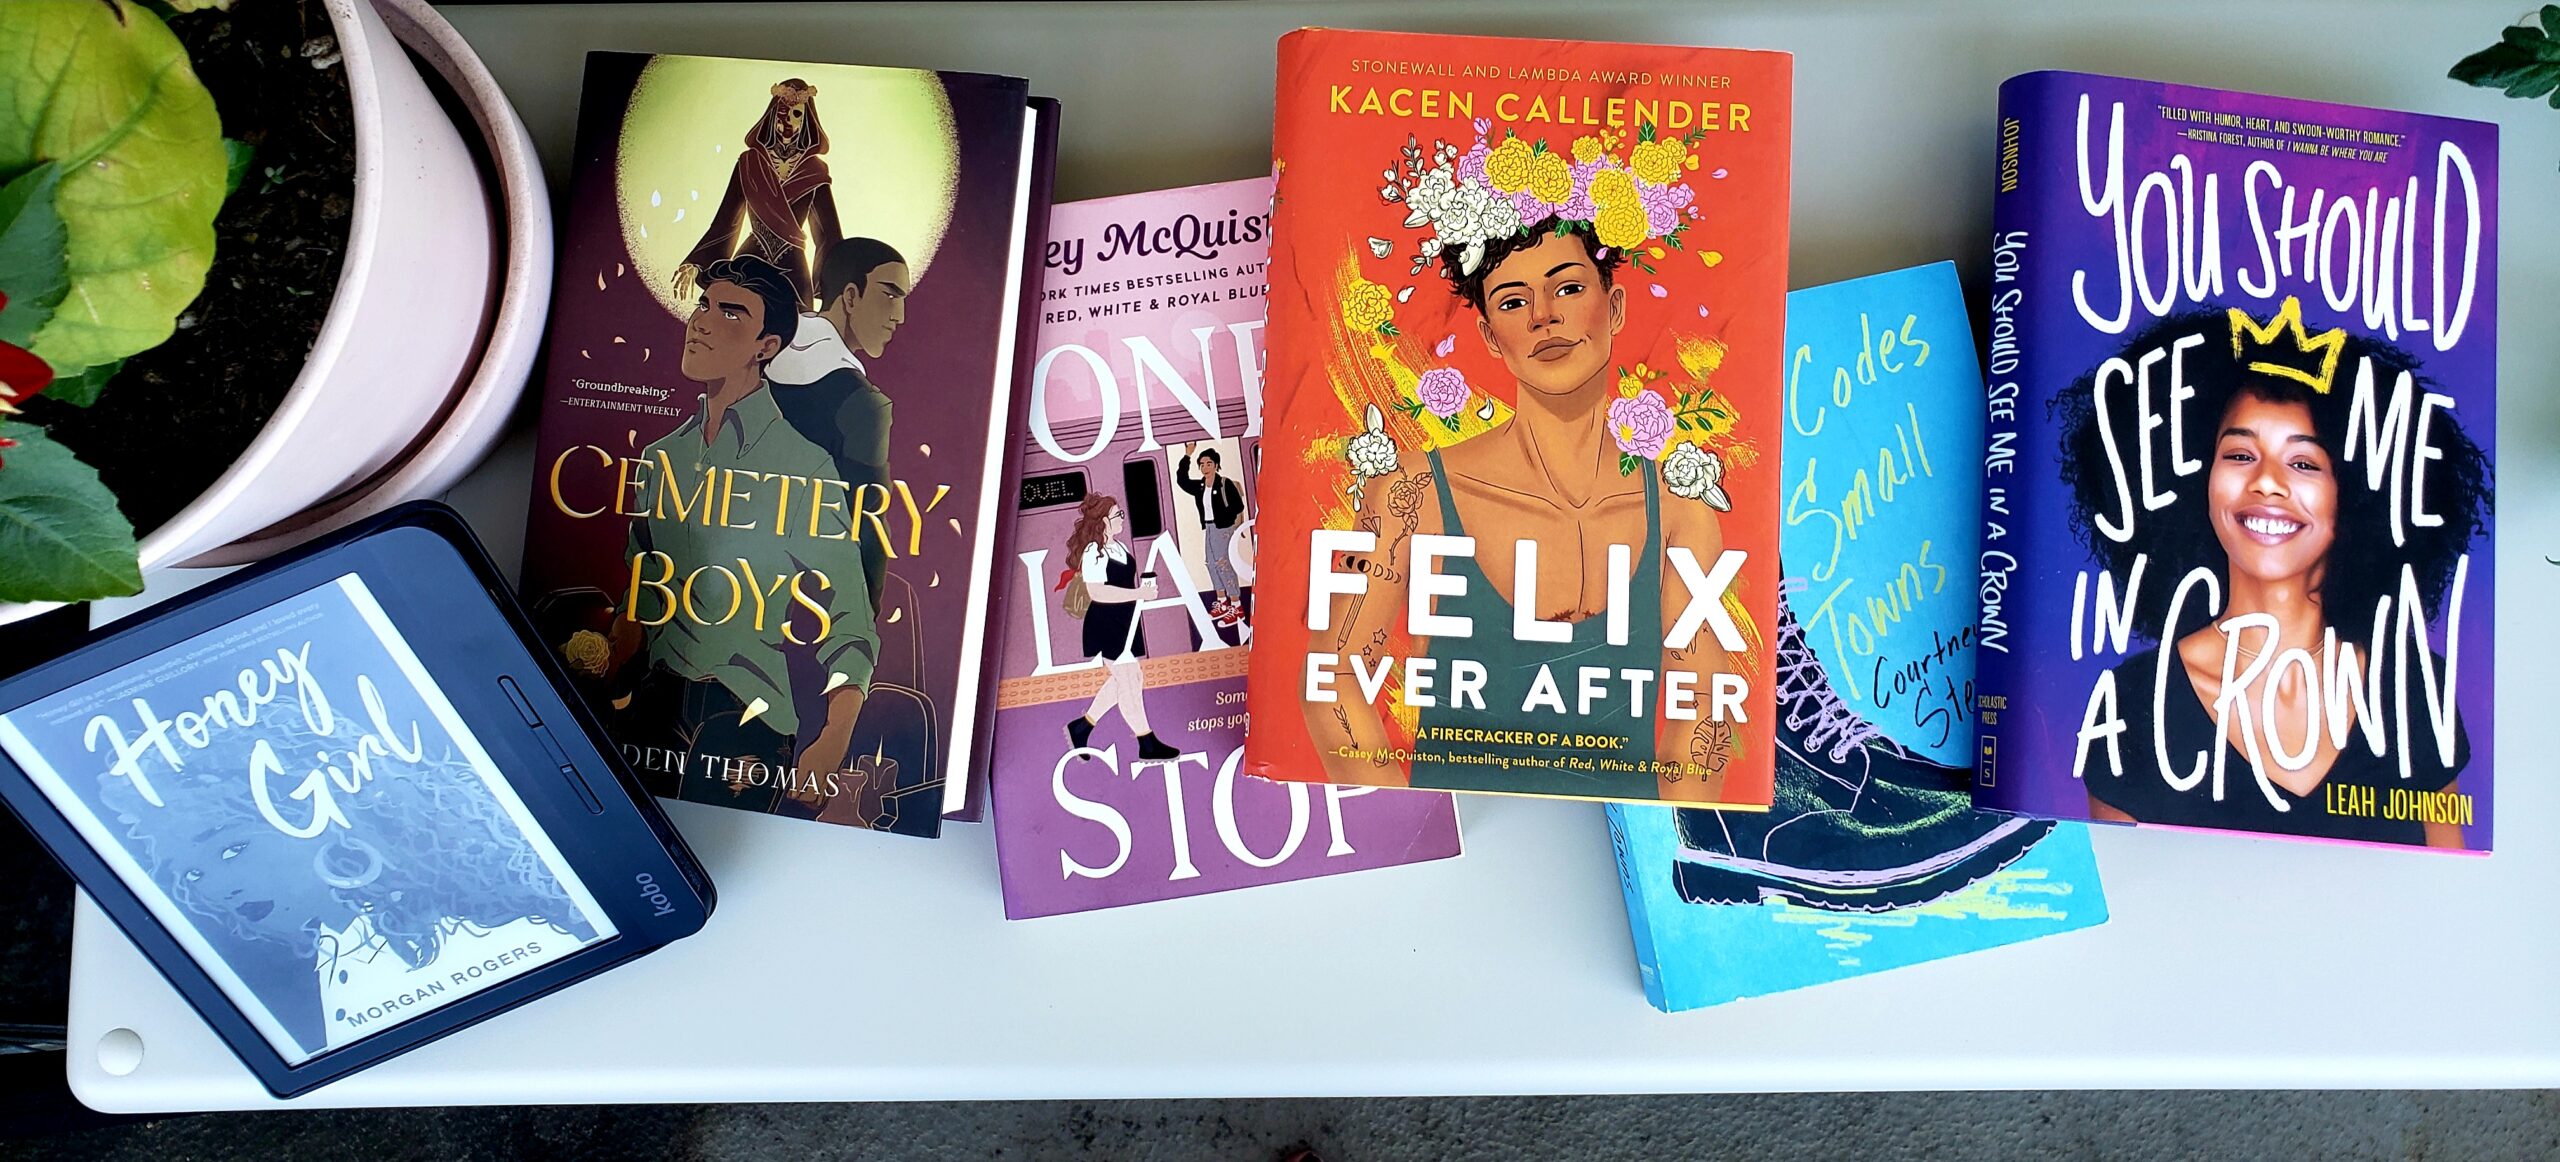 Top 7 Pride Month Books to Celebrate Queer Joy